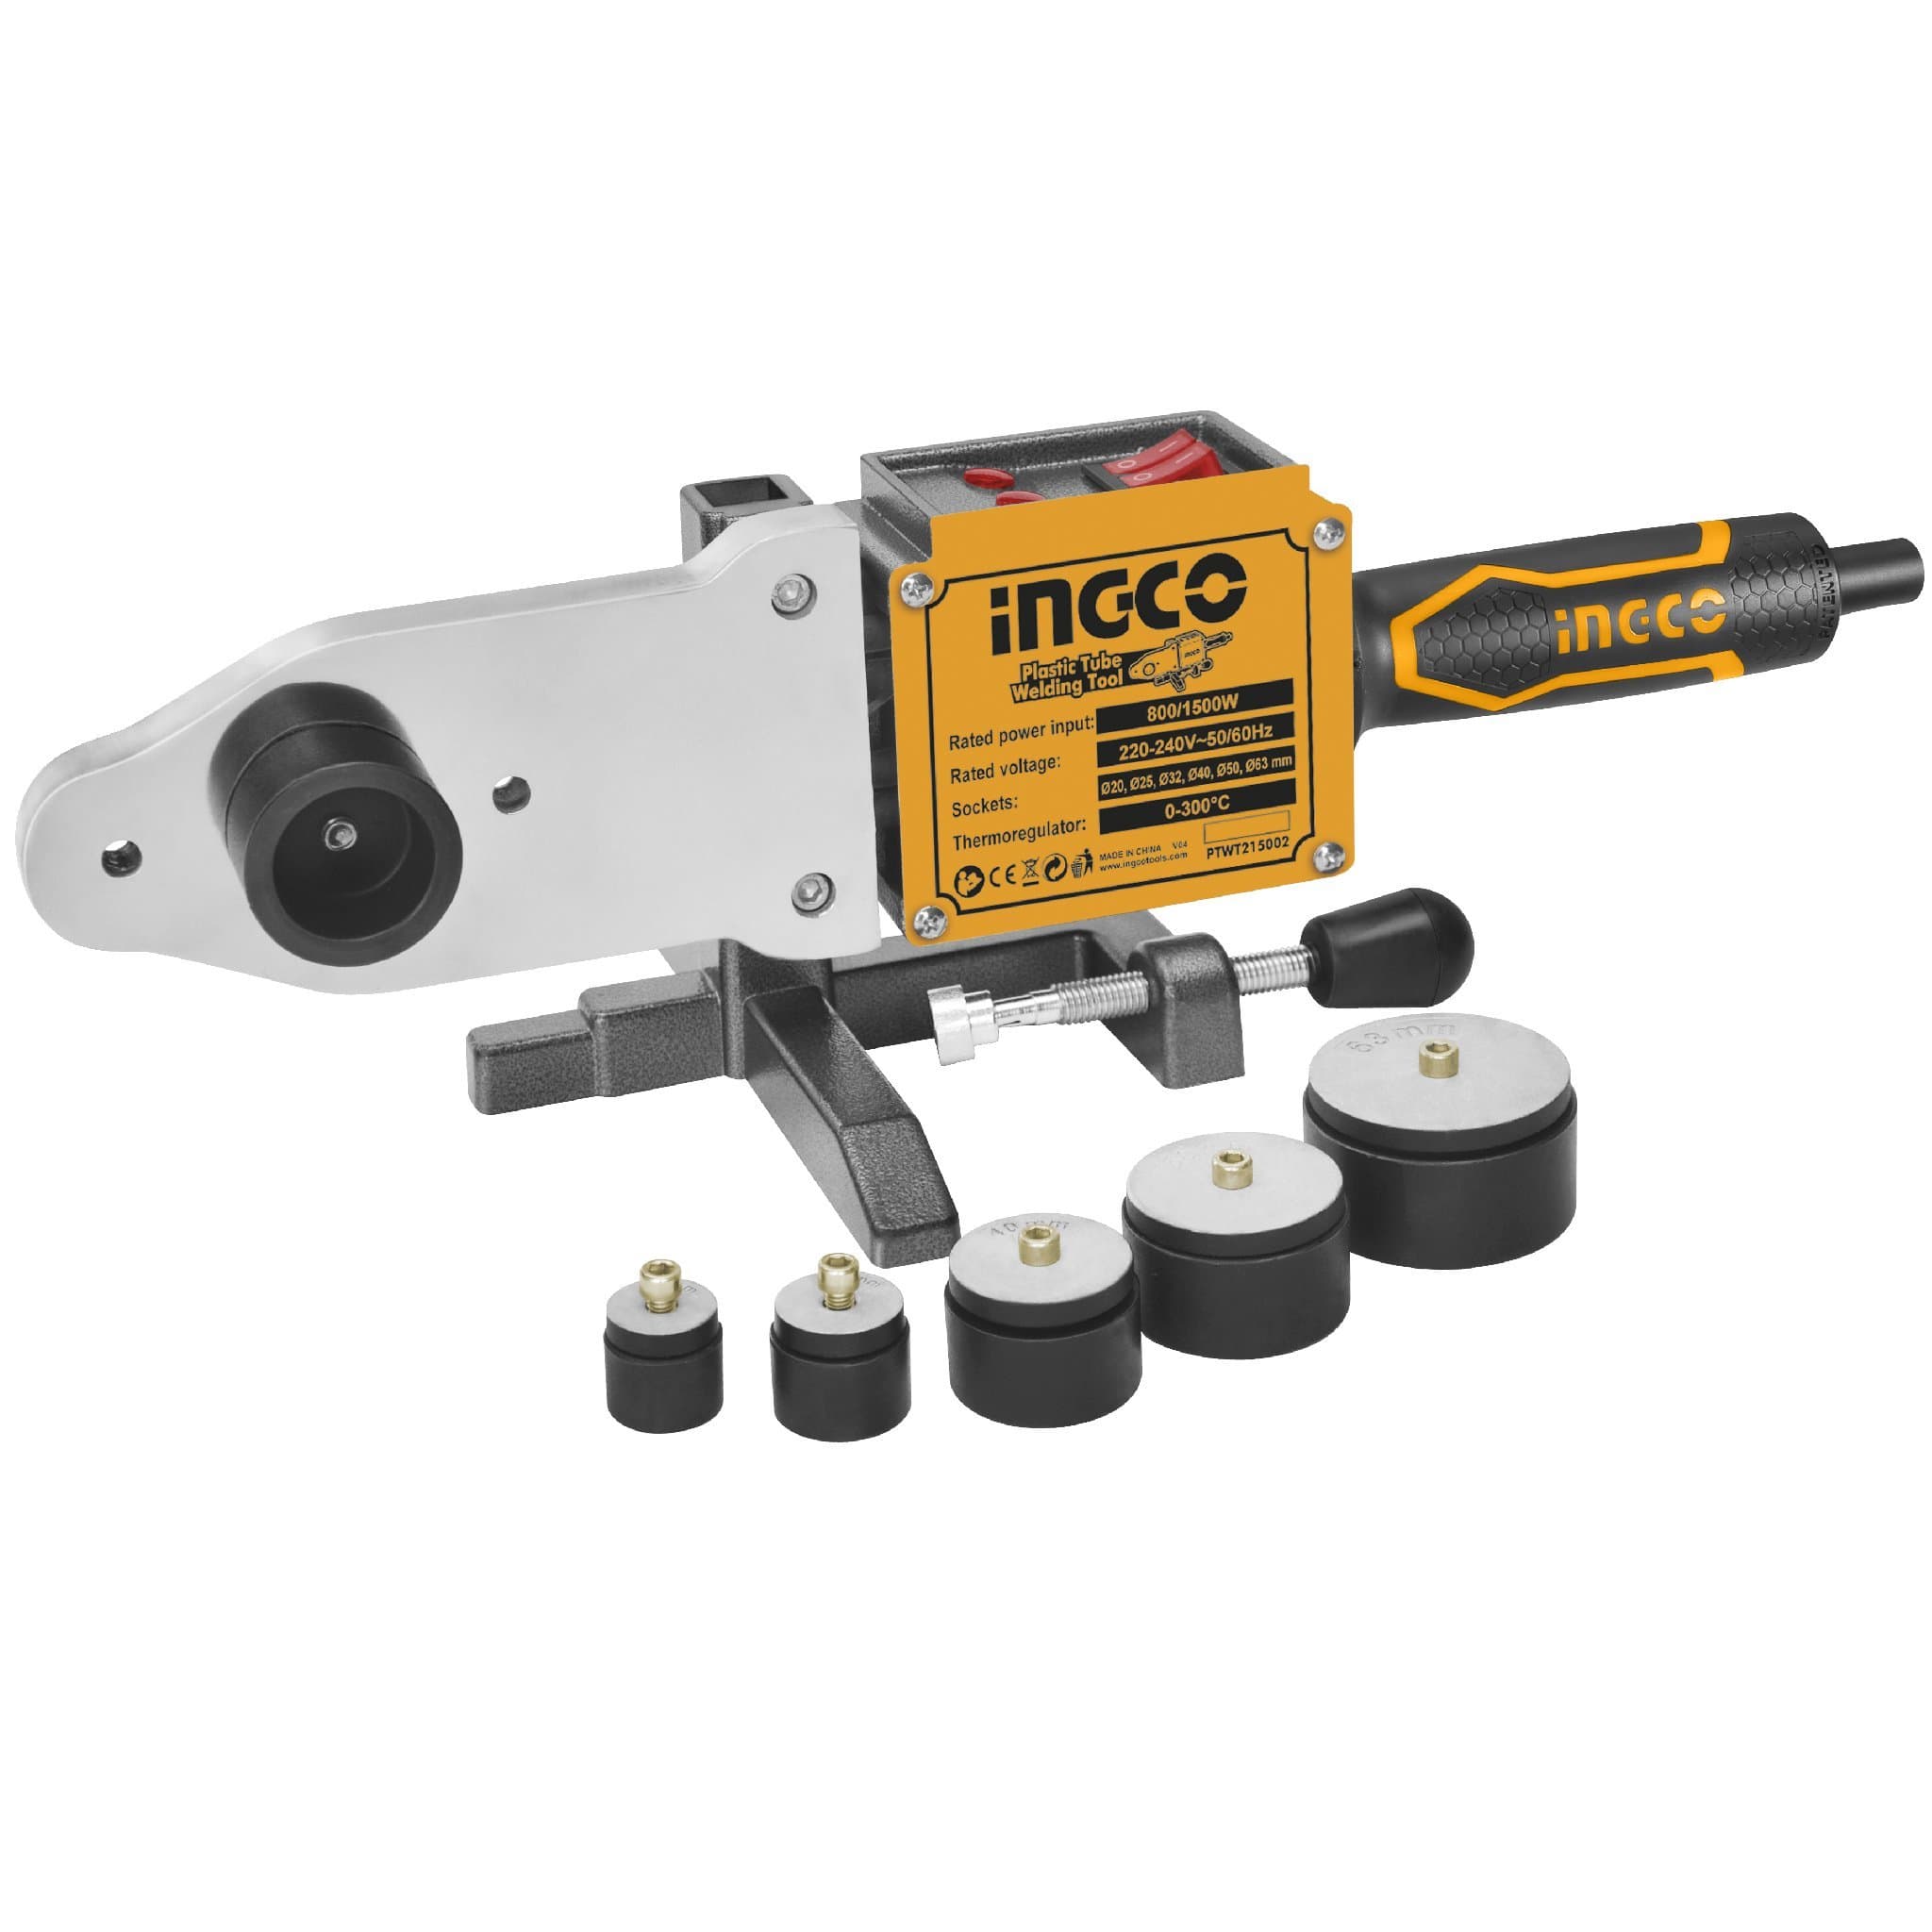 Ingco PPR - Plastic Tube Welding Tool - PTWT215002 | Supply Master | Accra, Ghana Tools Building Steel Engineering Hardware tool